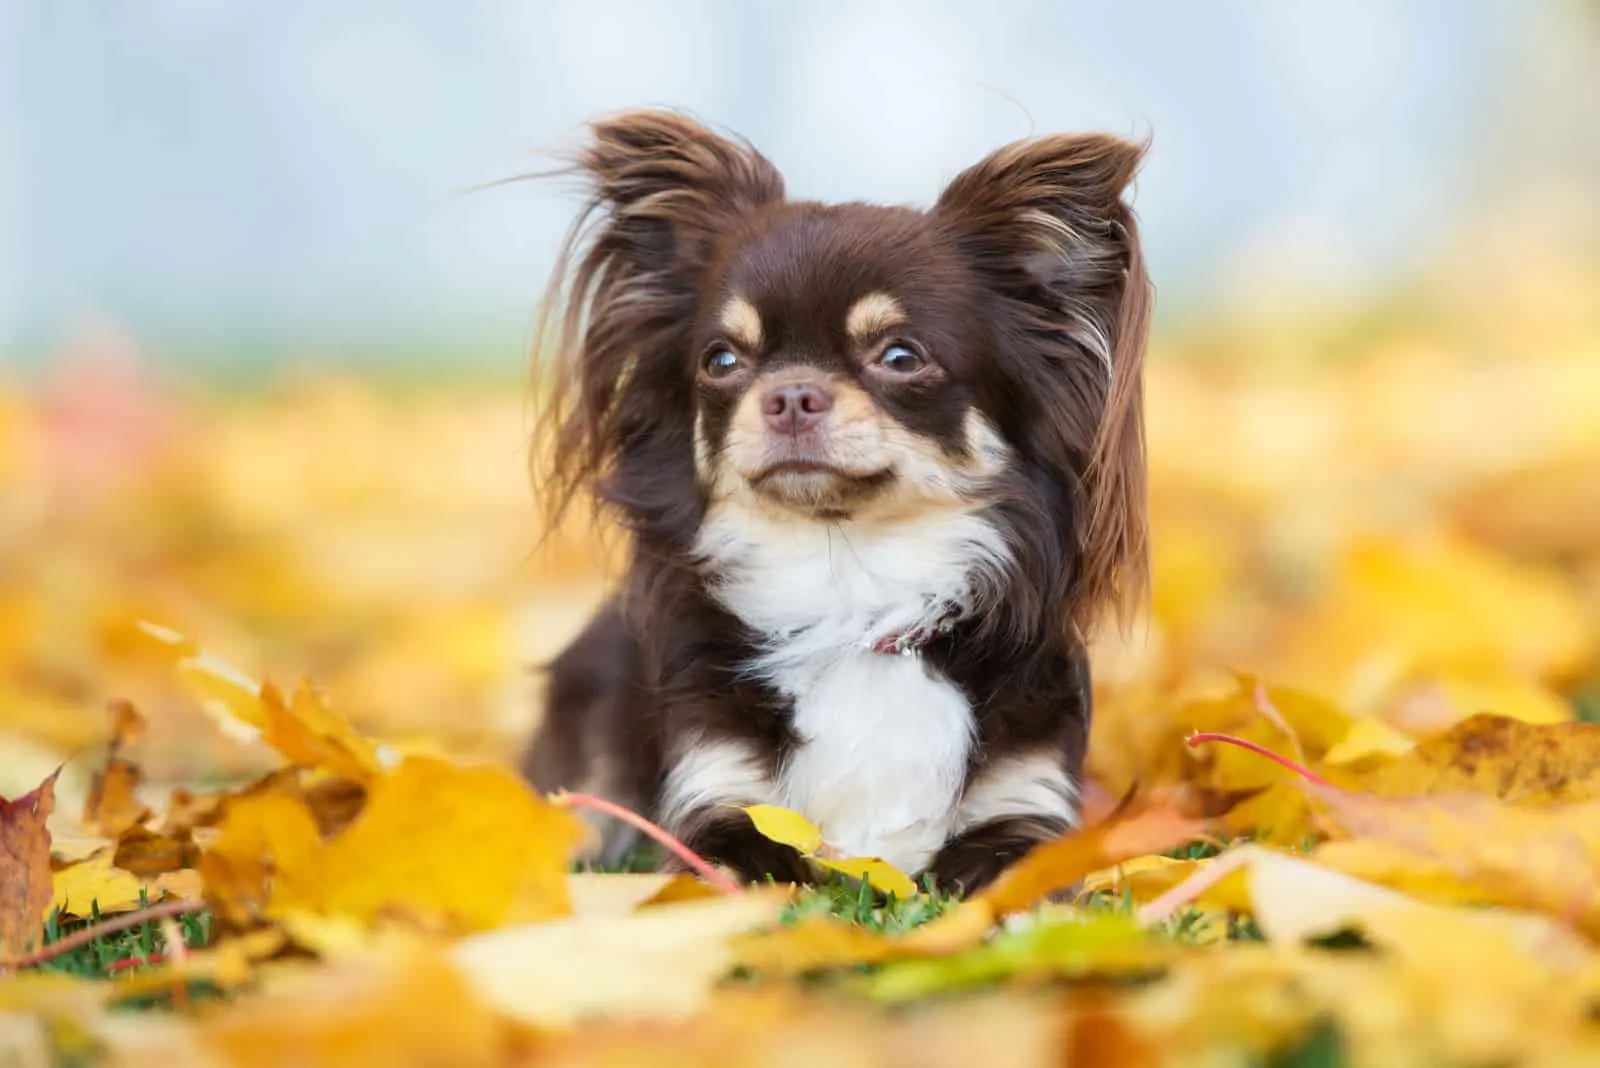 Chihuahua sitting on leaves